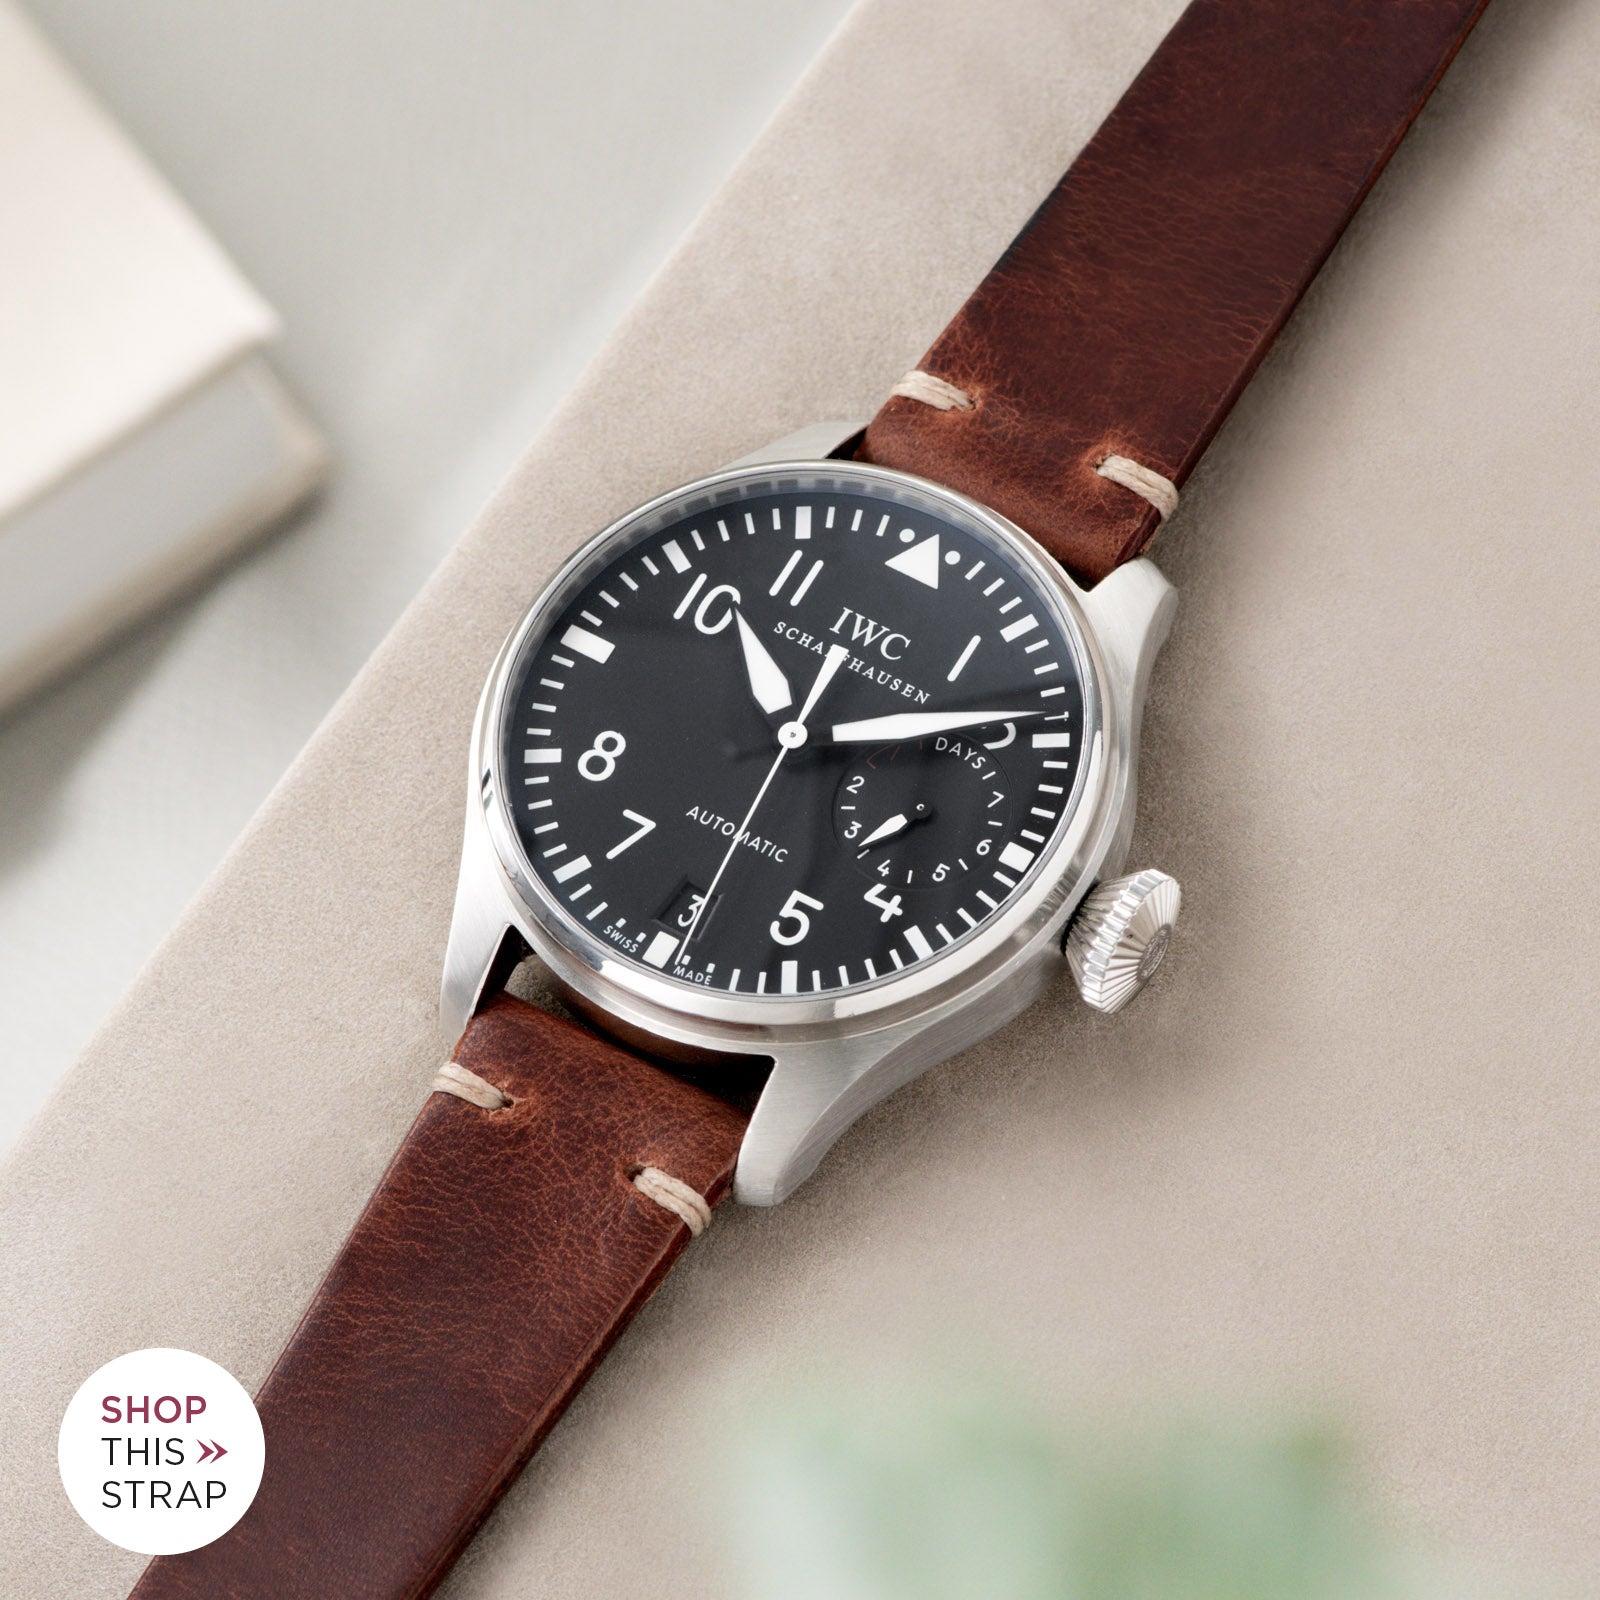 Bulang and Sons_Strap Guide_IWC Big Pilot Ref 5004_Siena Brown Leather Watch-Strap